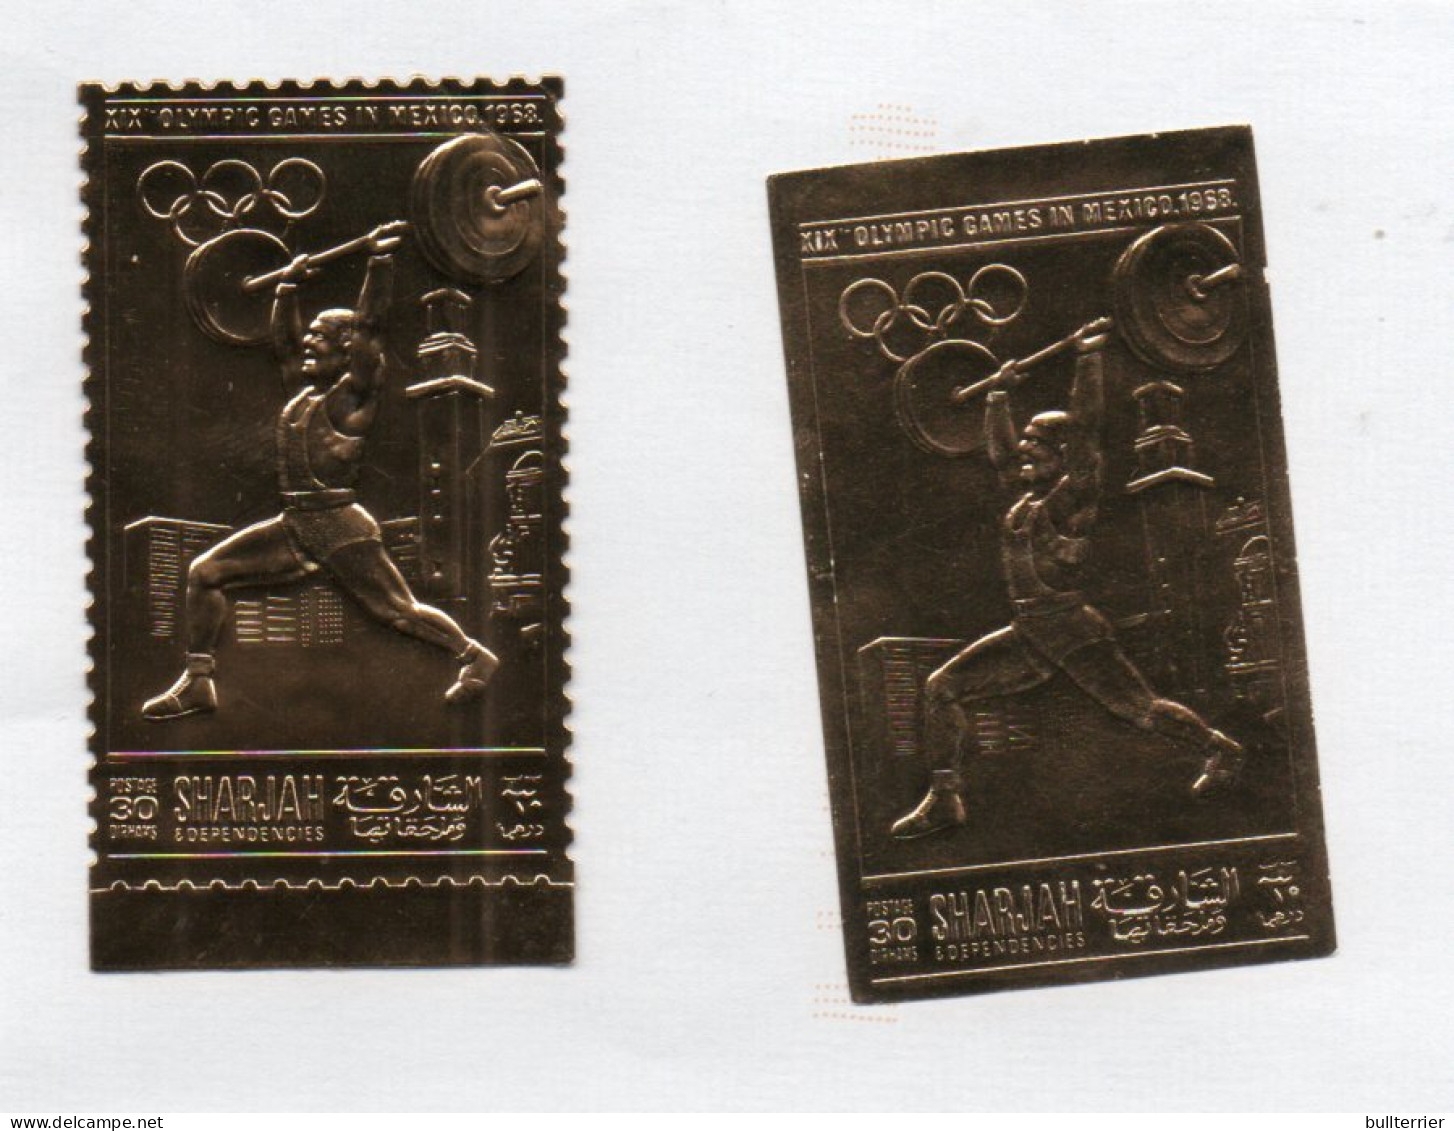 OLYMPICS - SHARJAH - 1968 -OLYMPICS / WEIGHTIFTING GOLD STAMP PERF & IMPERF MINT NEVER HINGED - Summer 1968: Mexico City